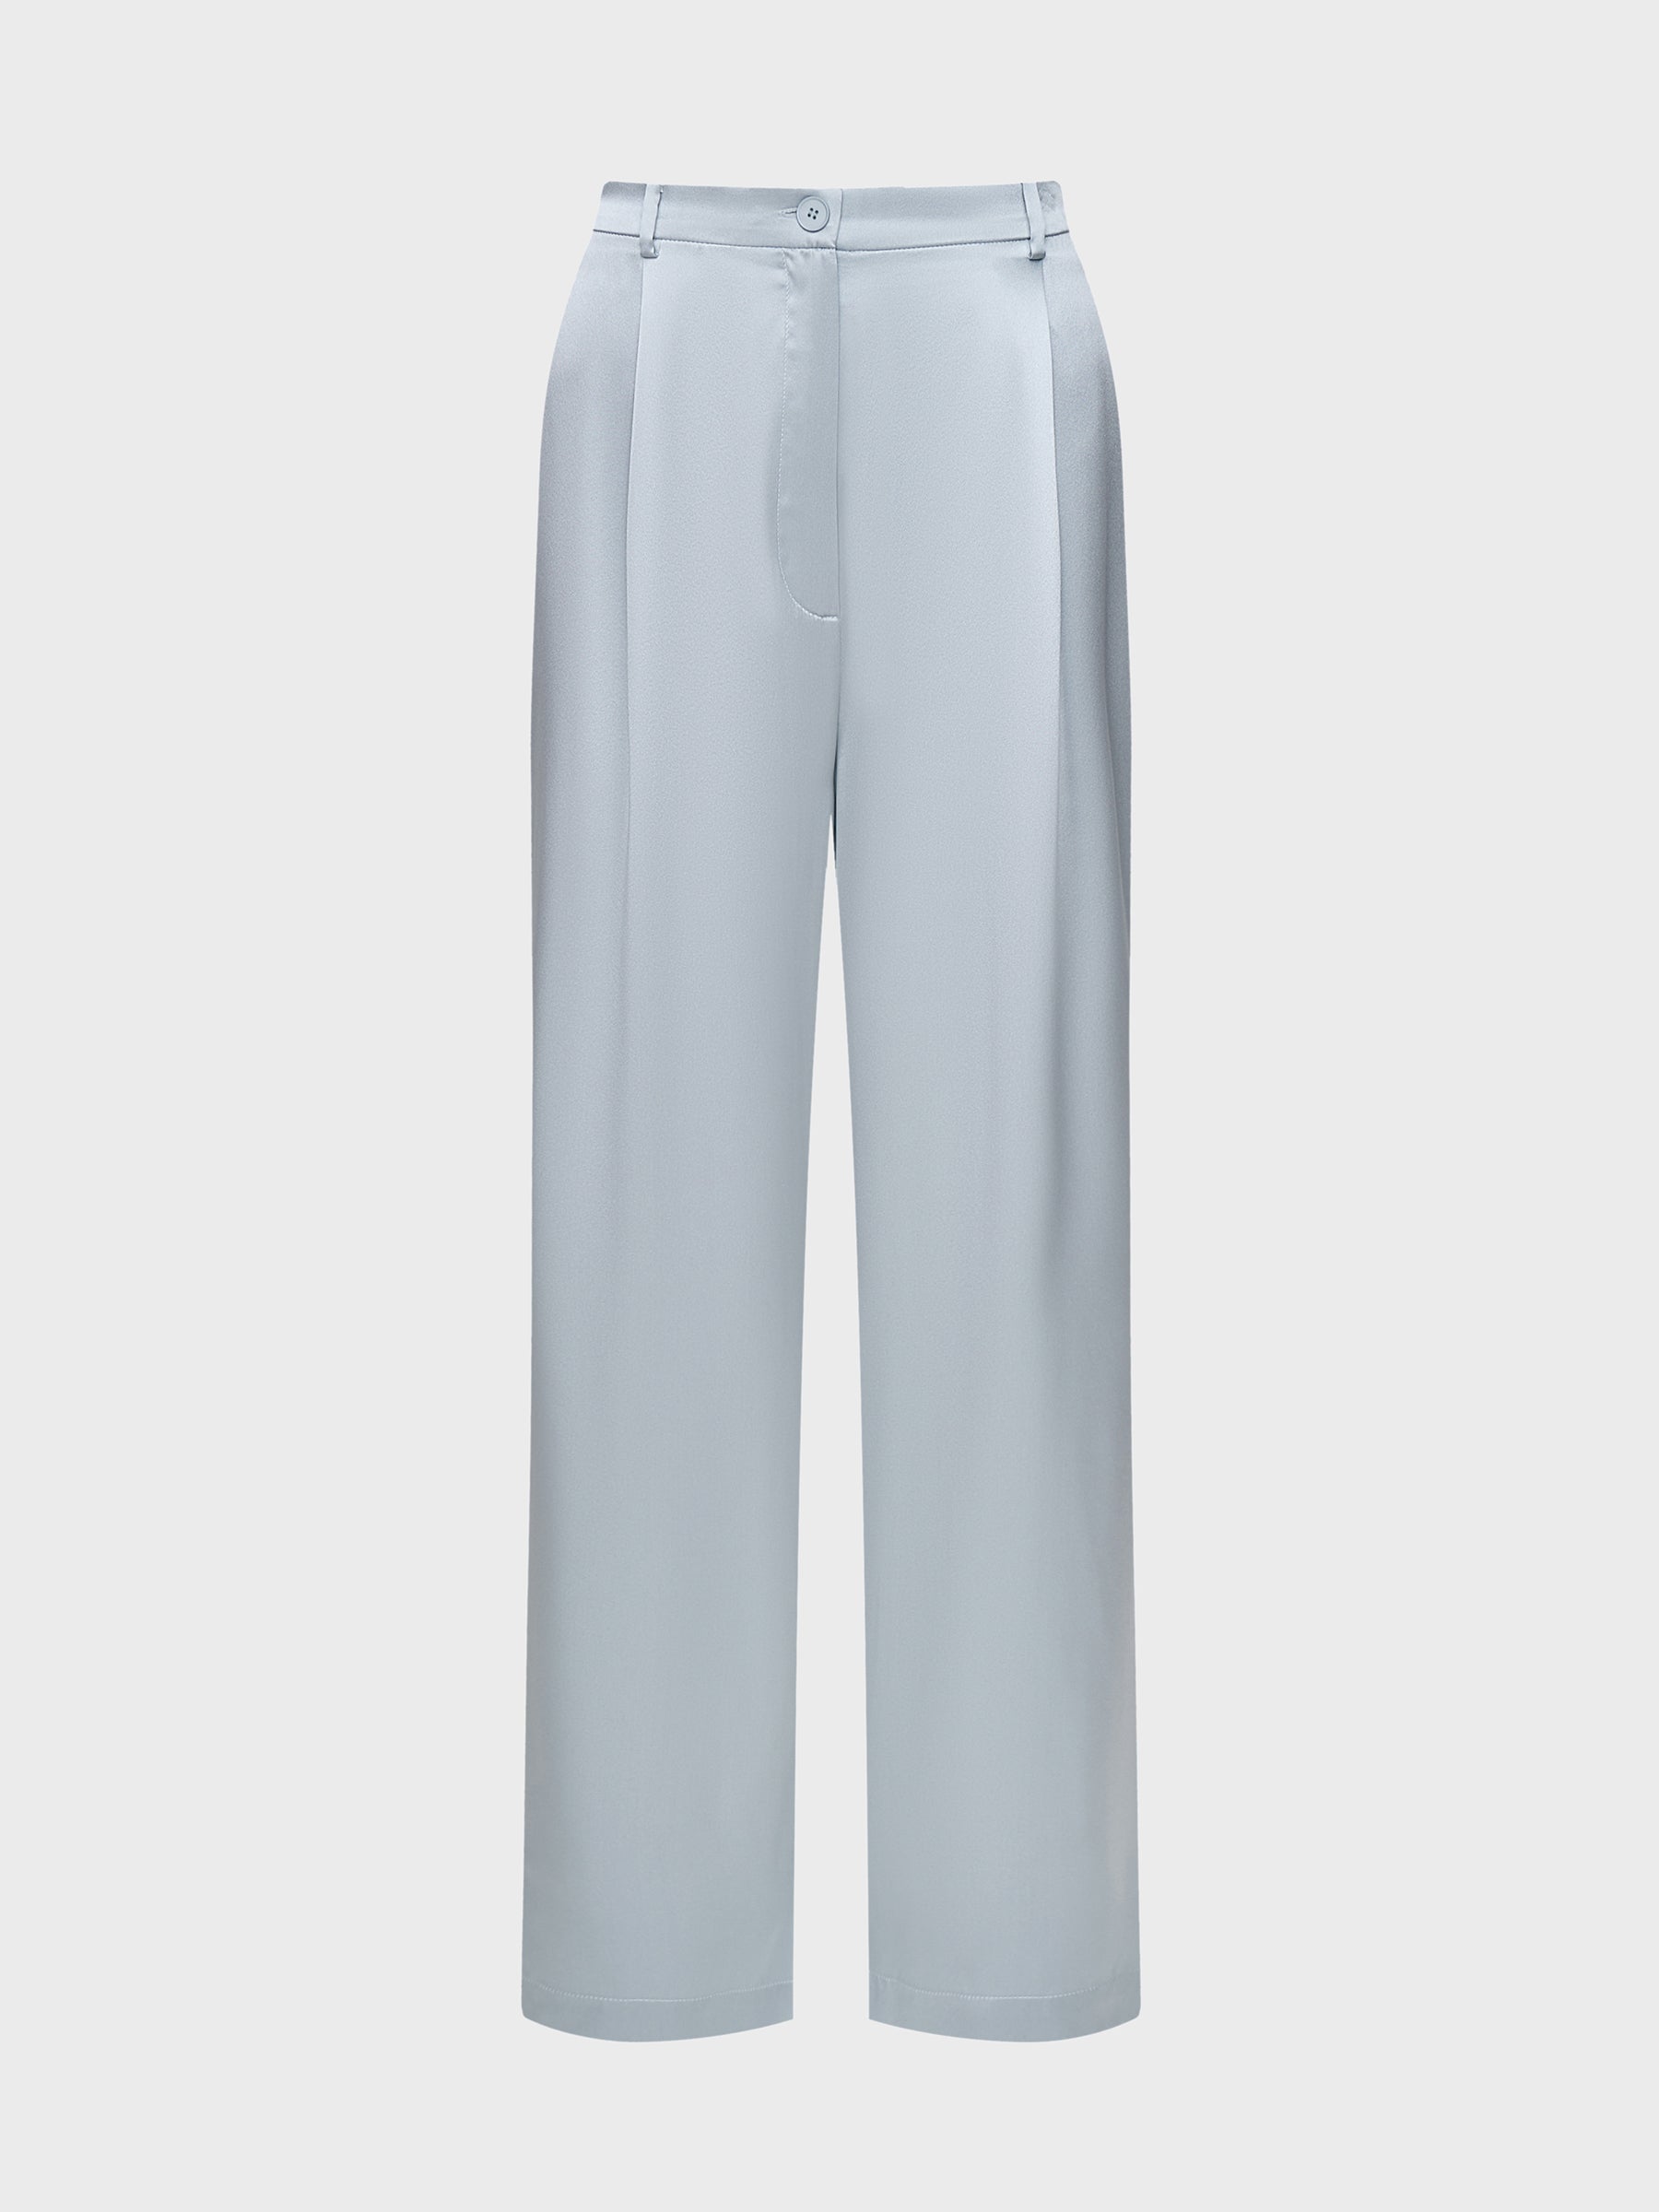 Mulberry silk trousers